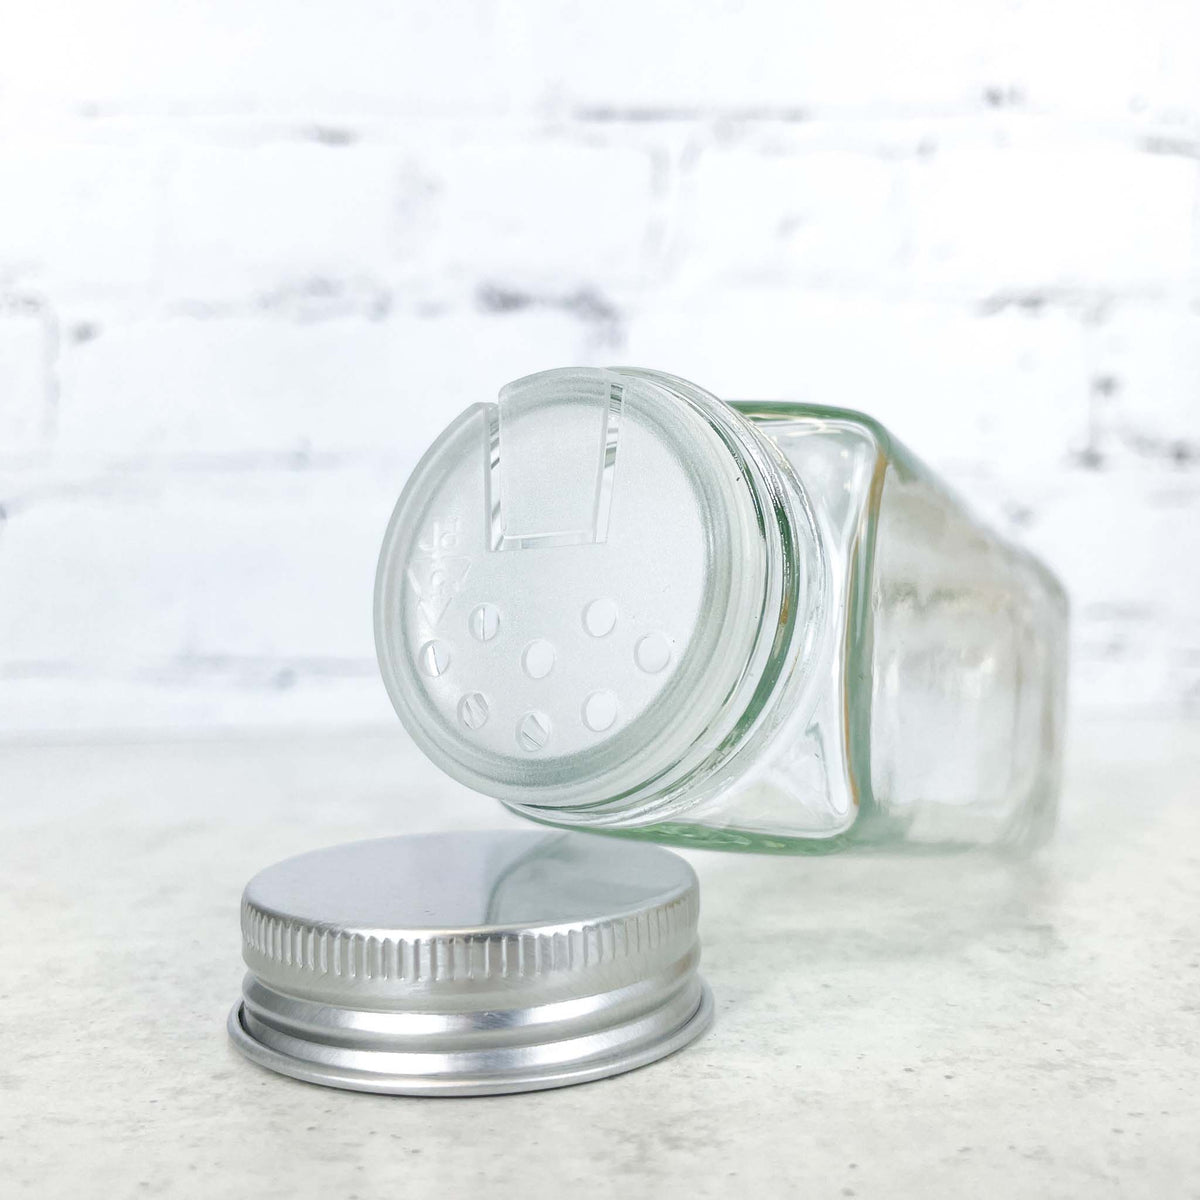 120 Shaker Spice Jars with Silver Lid